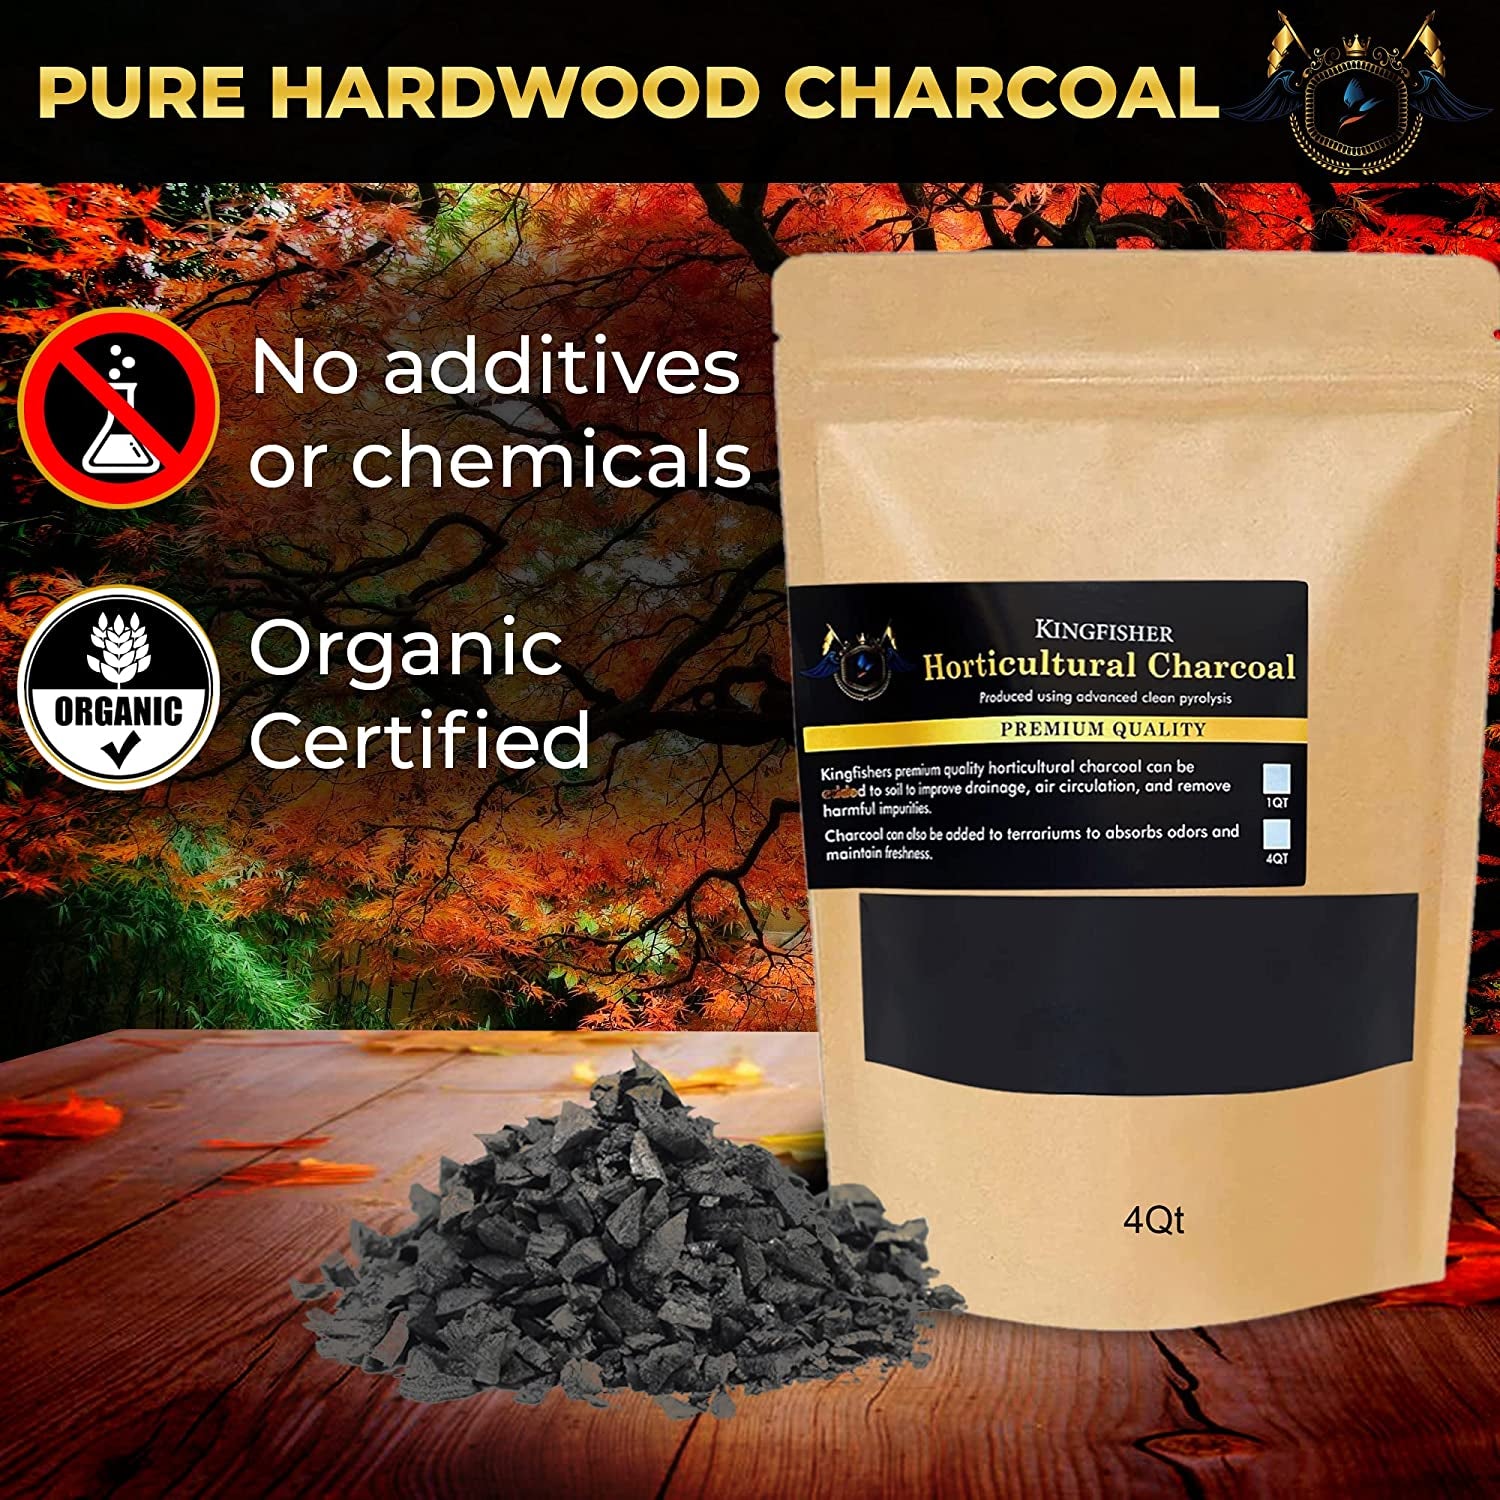 Kingfishers, Kingfishers Organic Horticultural Charcoal & Terrarium Charcoal | Charcoal for Plants | Pure Hardwood Charcoal for Planting and Gardening | (1 Quart)